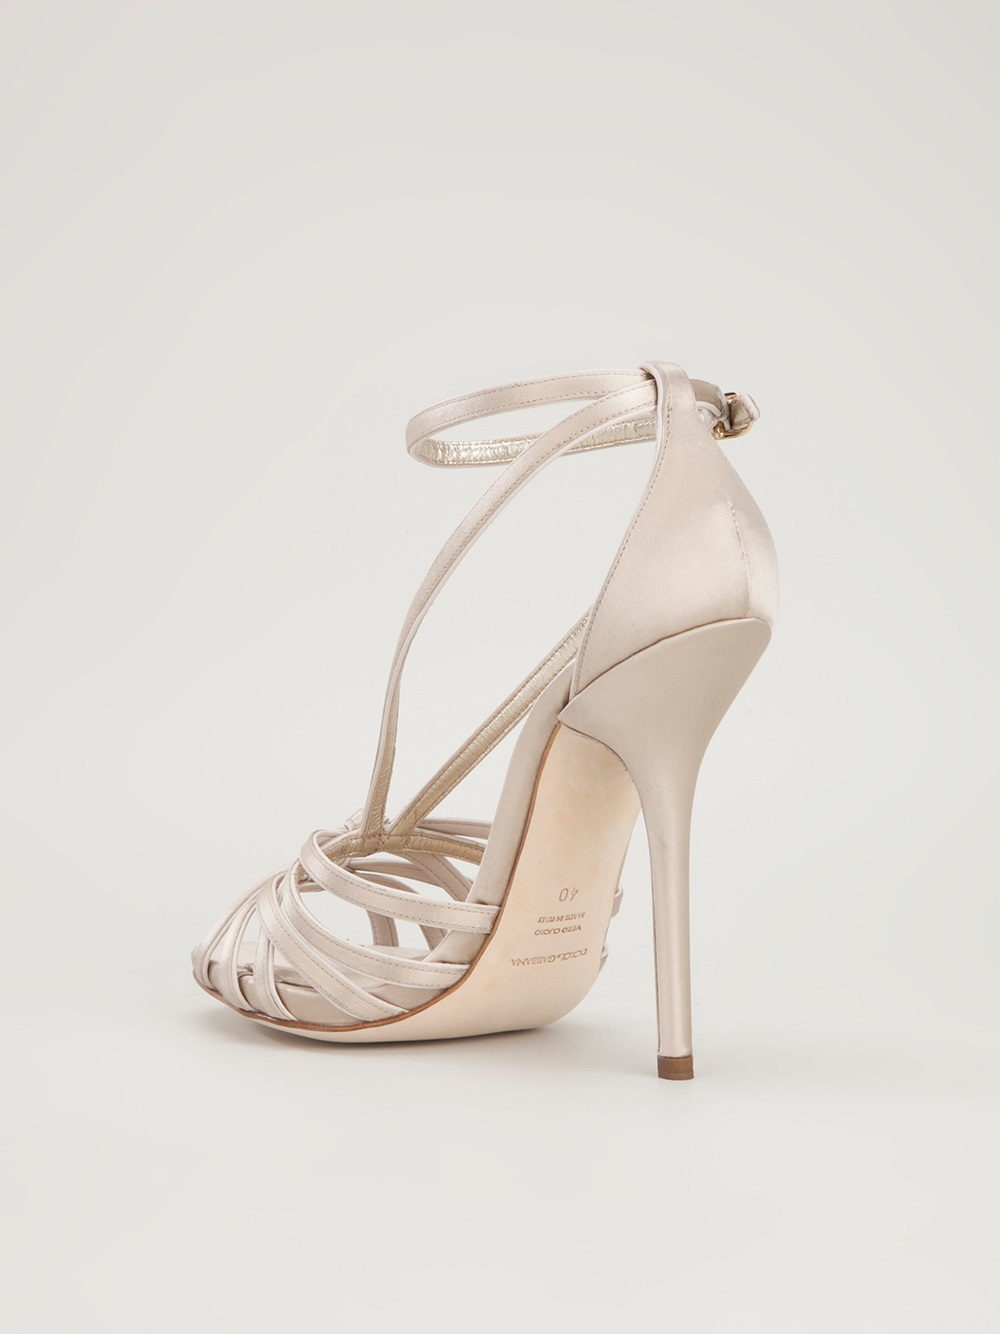 Lyst - Dolce & Gabbana Strappy Heeled Sandals in Natural